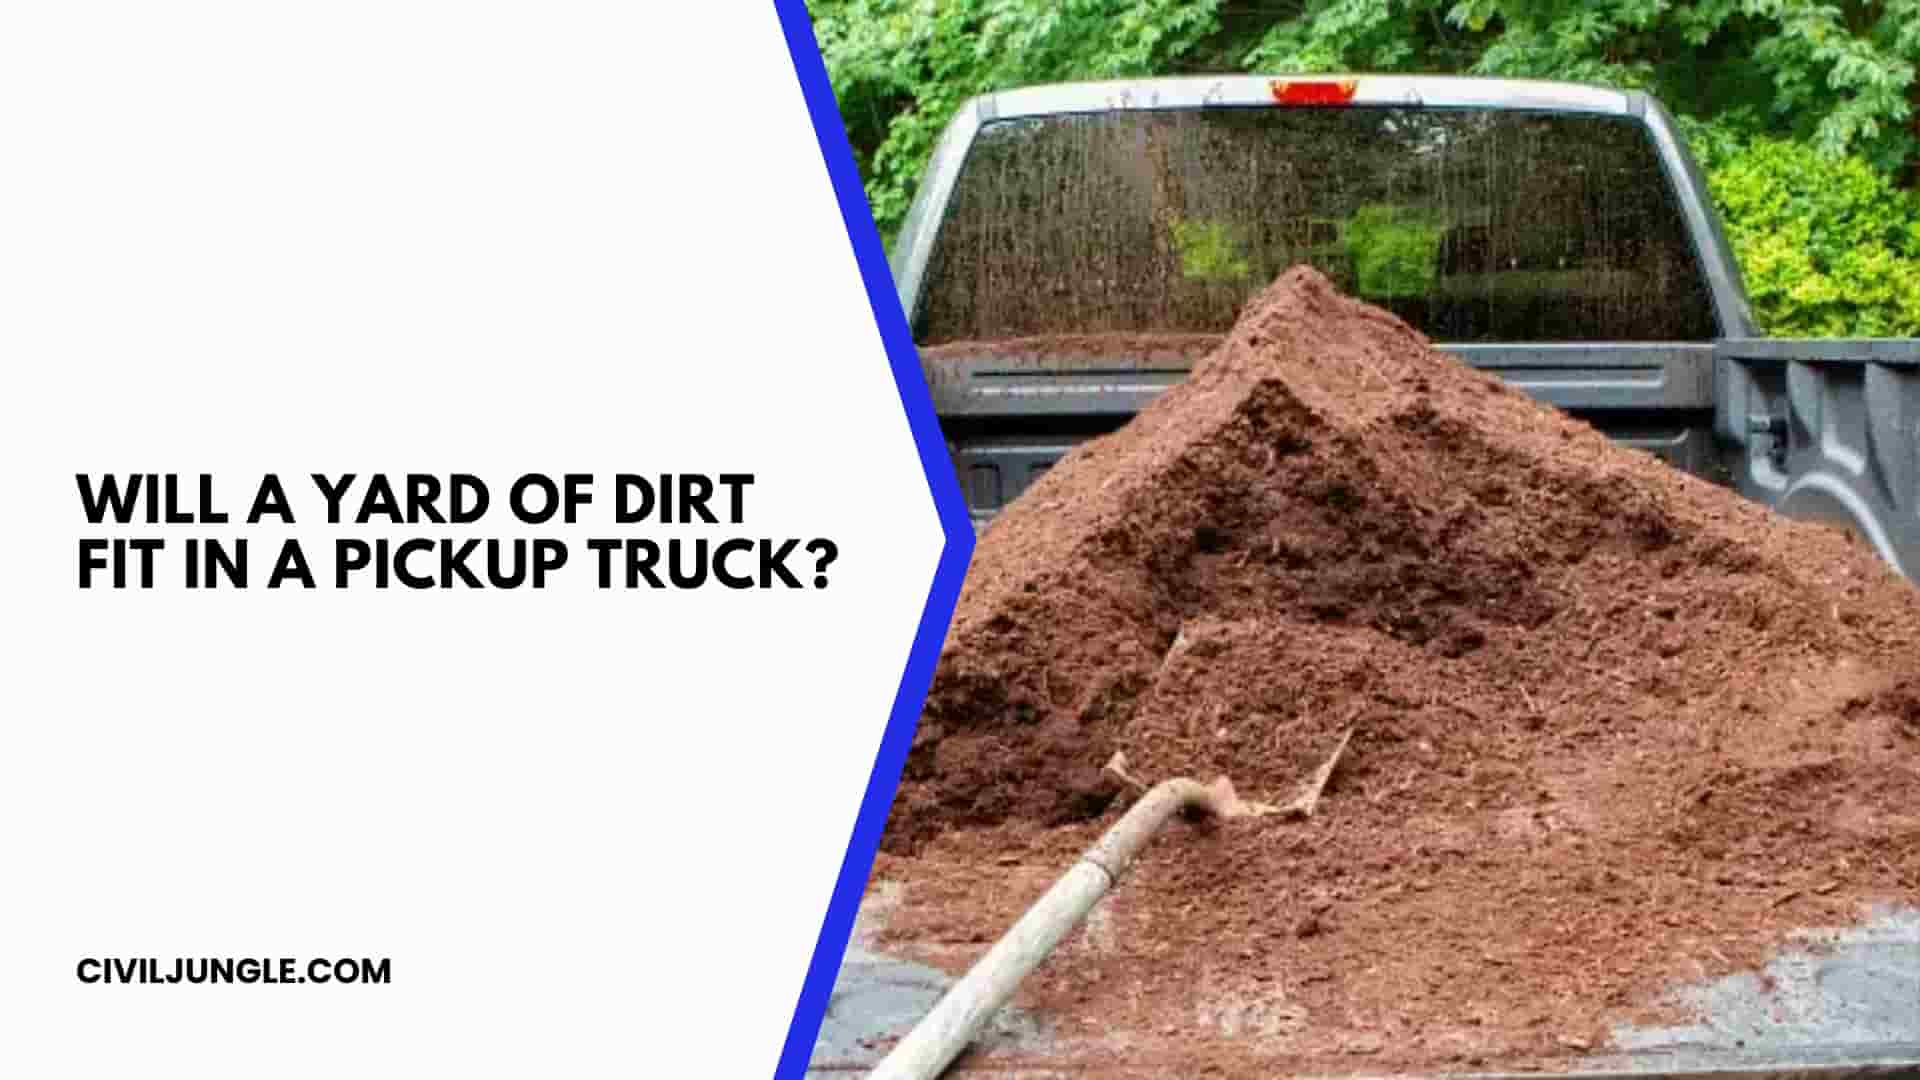 Will a Yard of Dirt Fit in a Pickup Truck?